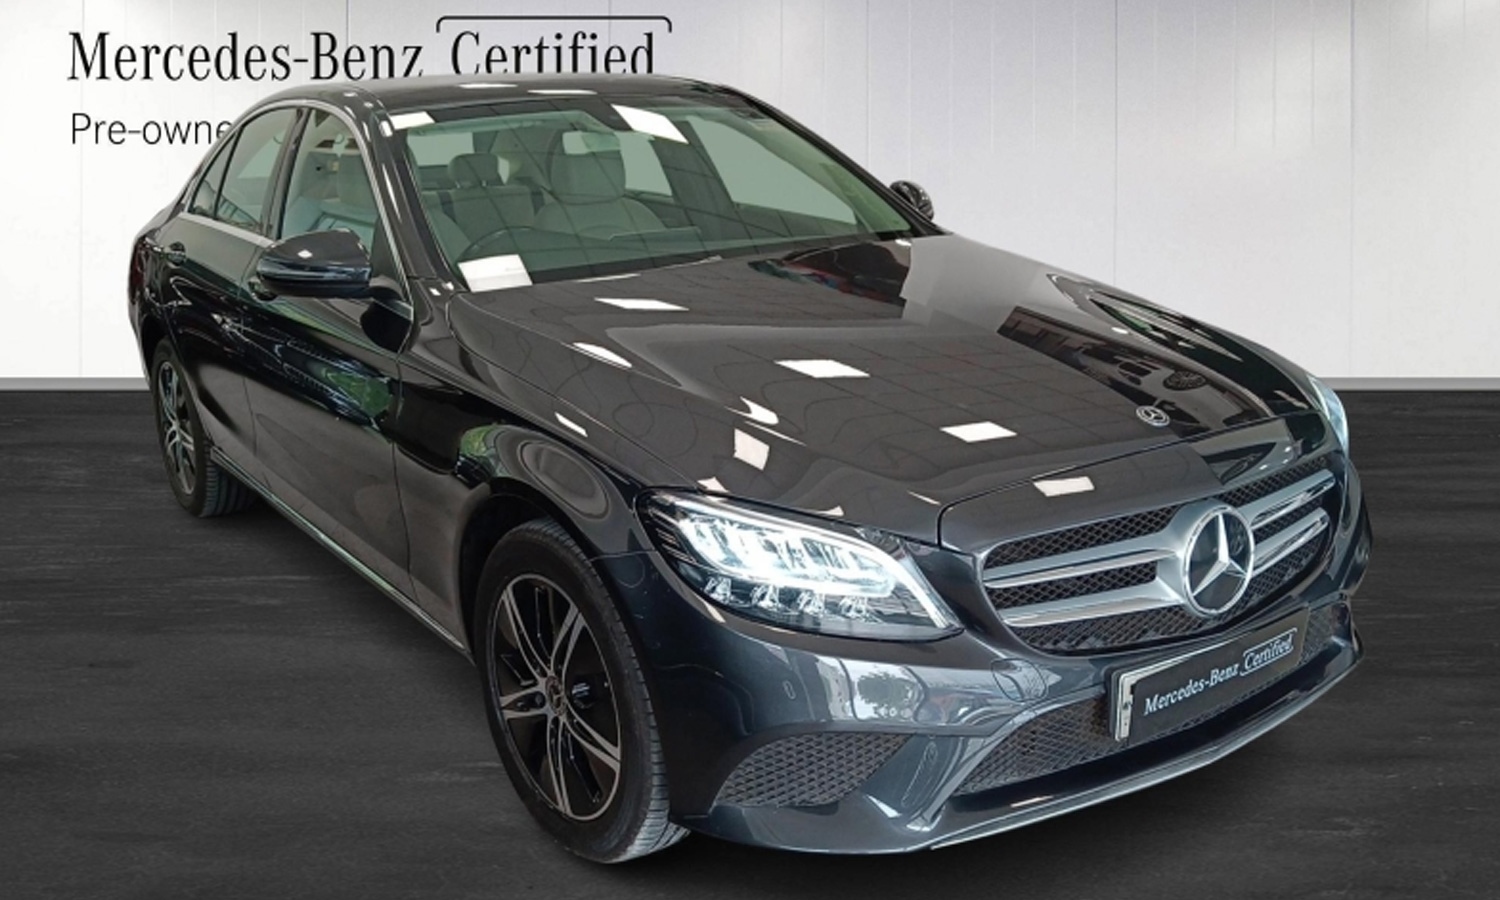 Mercedes-Benz-Used-Cars-2